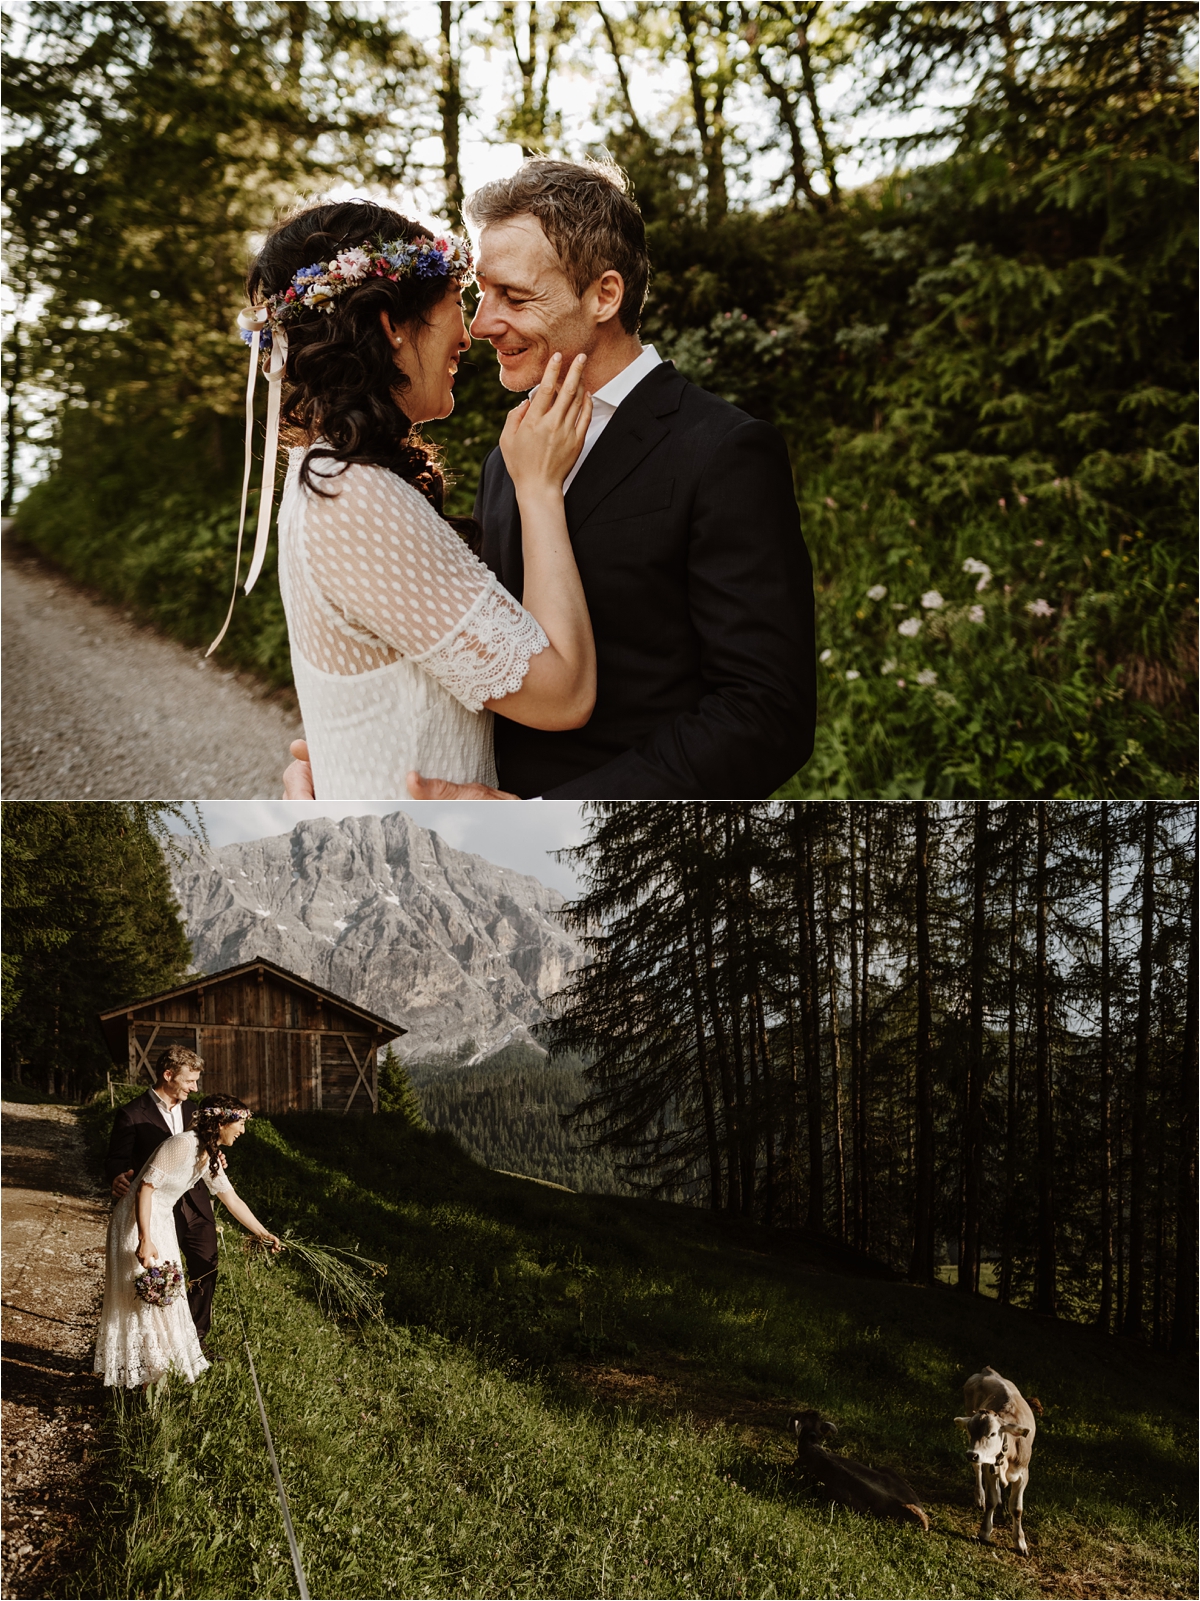 The bride and groom find baby cows in a meadow in the Dolomites. Photo by Wild Connections Photography